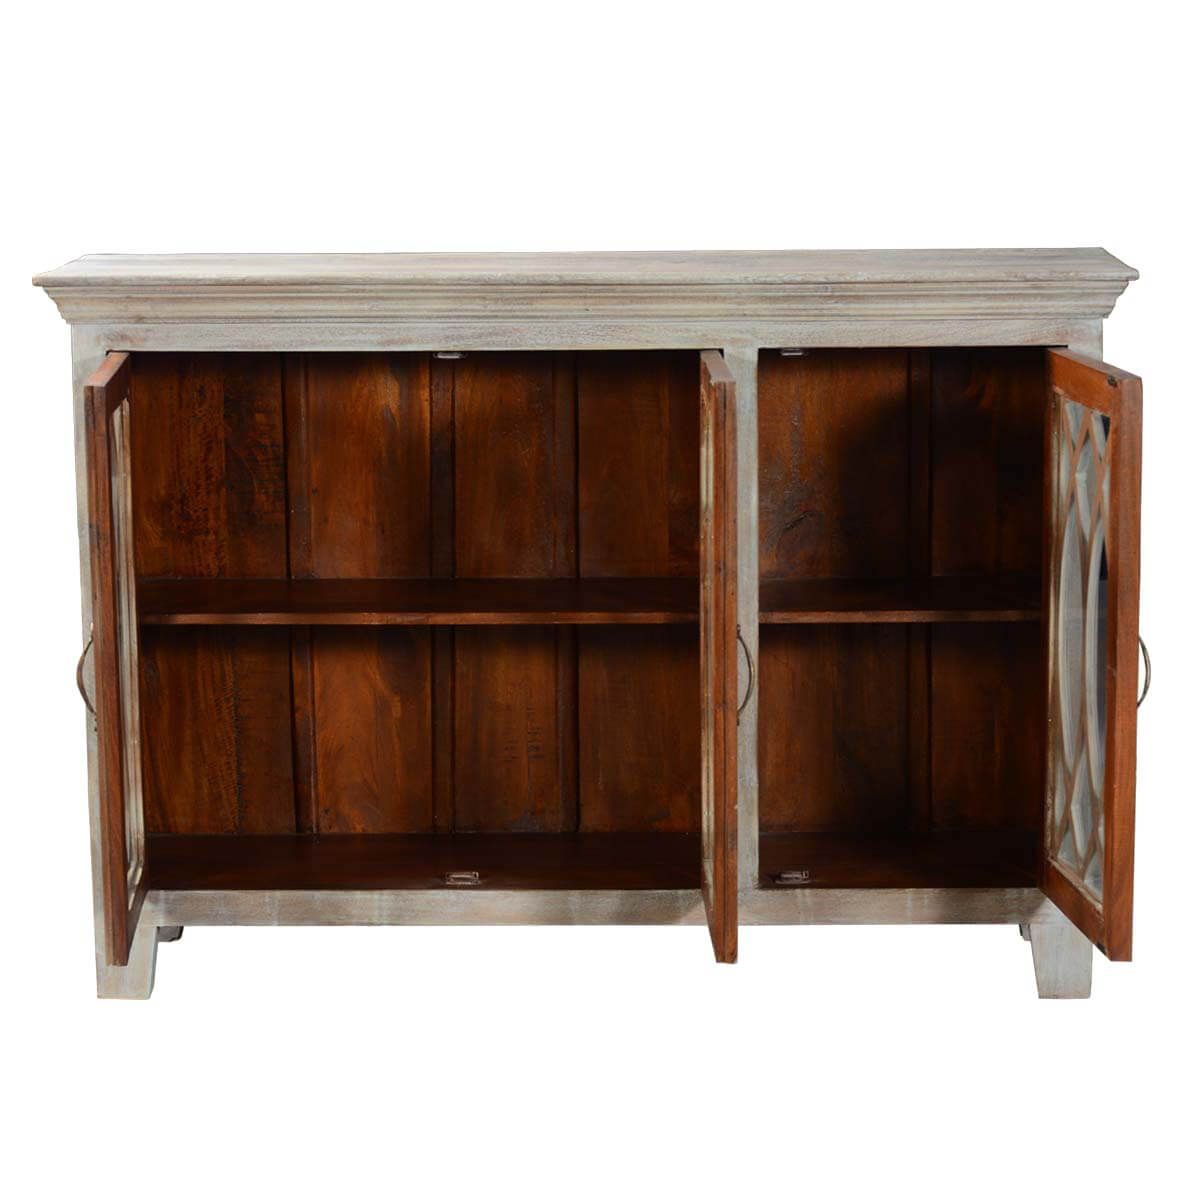 Sintra And Dark Brown Sideboard Orage Cabinet With Glass Pertaining To Best And Newest Palisade Sideboards (View 14 of 20)